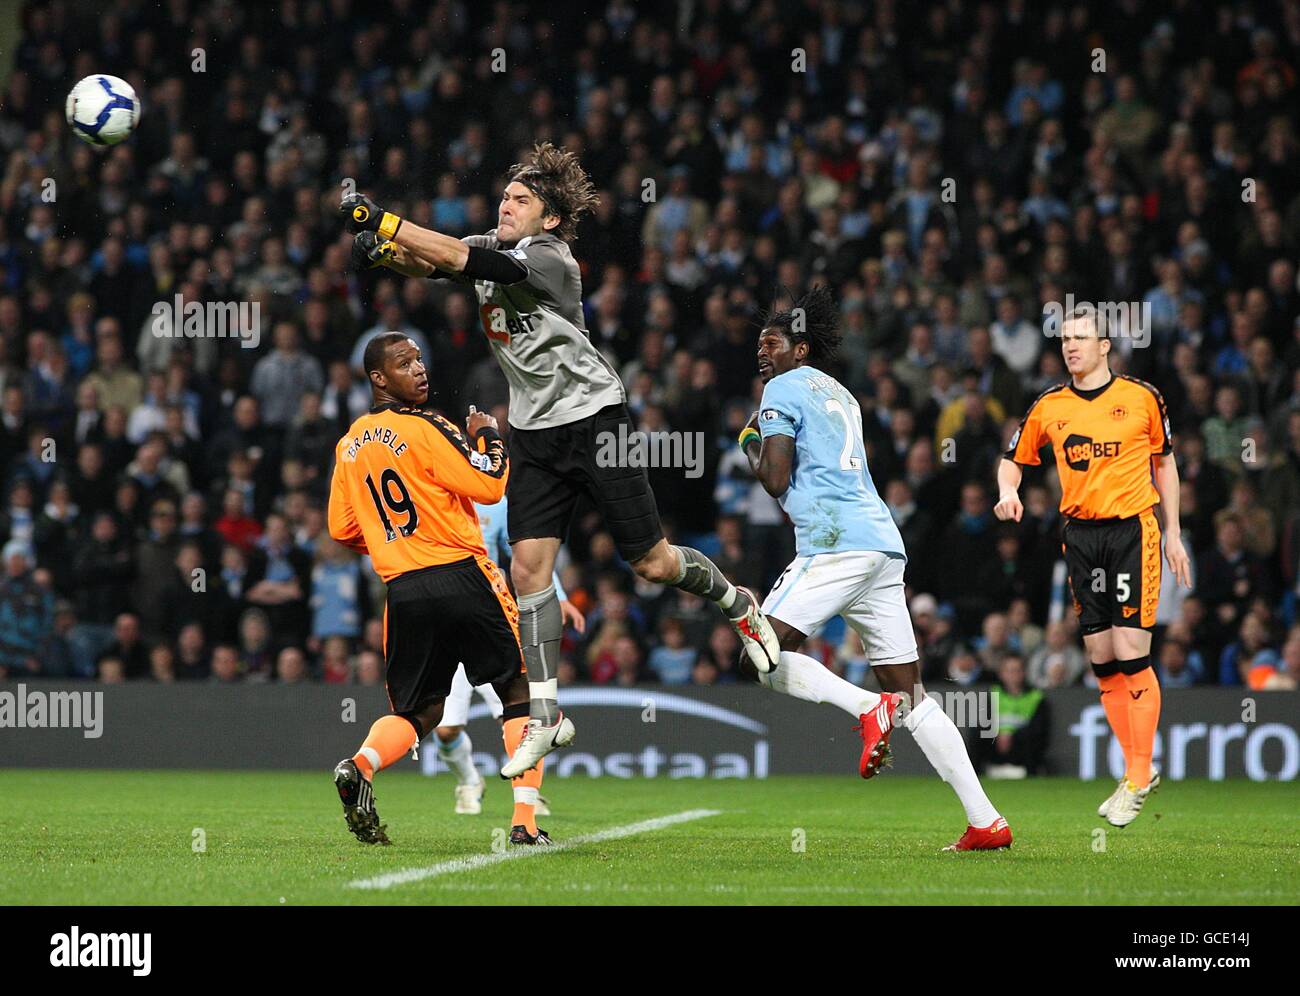 Soccer - Barclays Premier League - Manchester City v Wigan Athletic - City of Manchester Stadium. Wigan Athletic goalkeeper Vladimir Stojkovic (second left) jumps highest to clear the ball Stock Photo